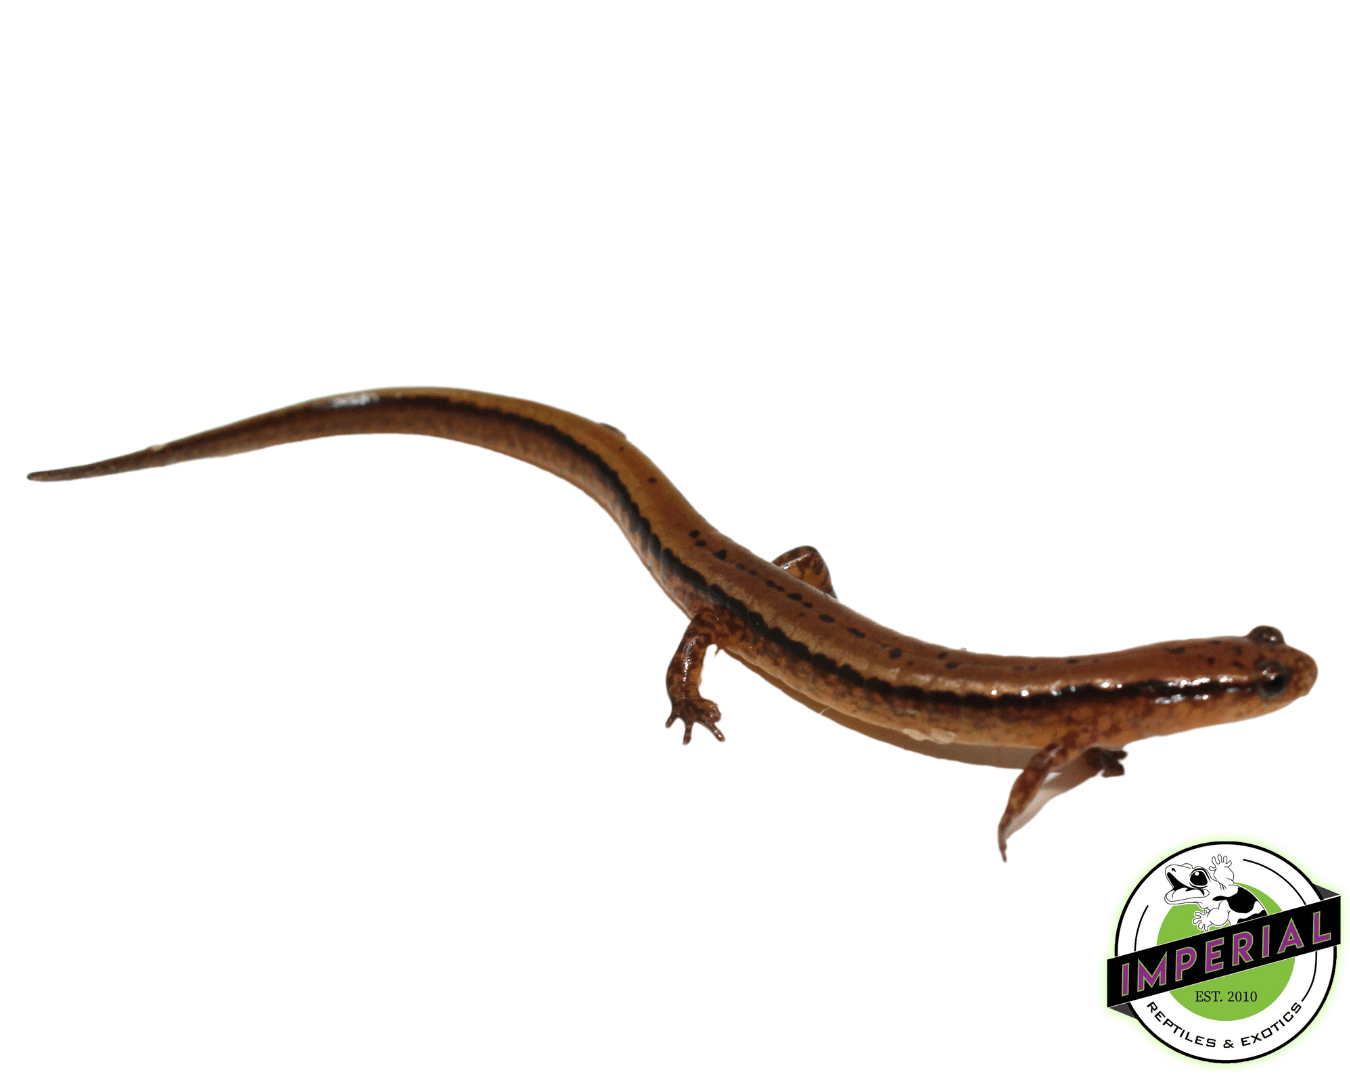 Two Lined Salamander For - REPTILES & – Sale EXOTICS Reptiles Imperial IMPERIAL